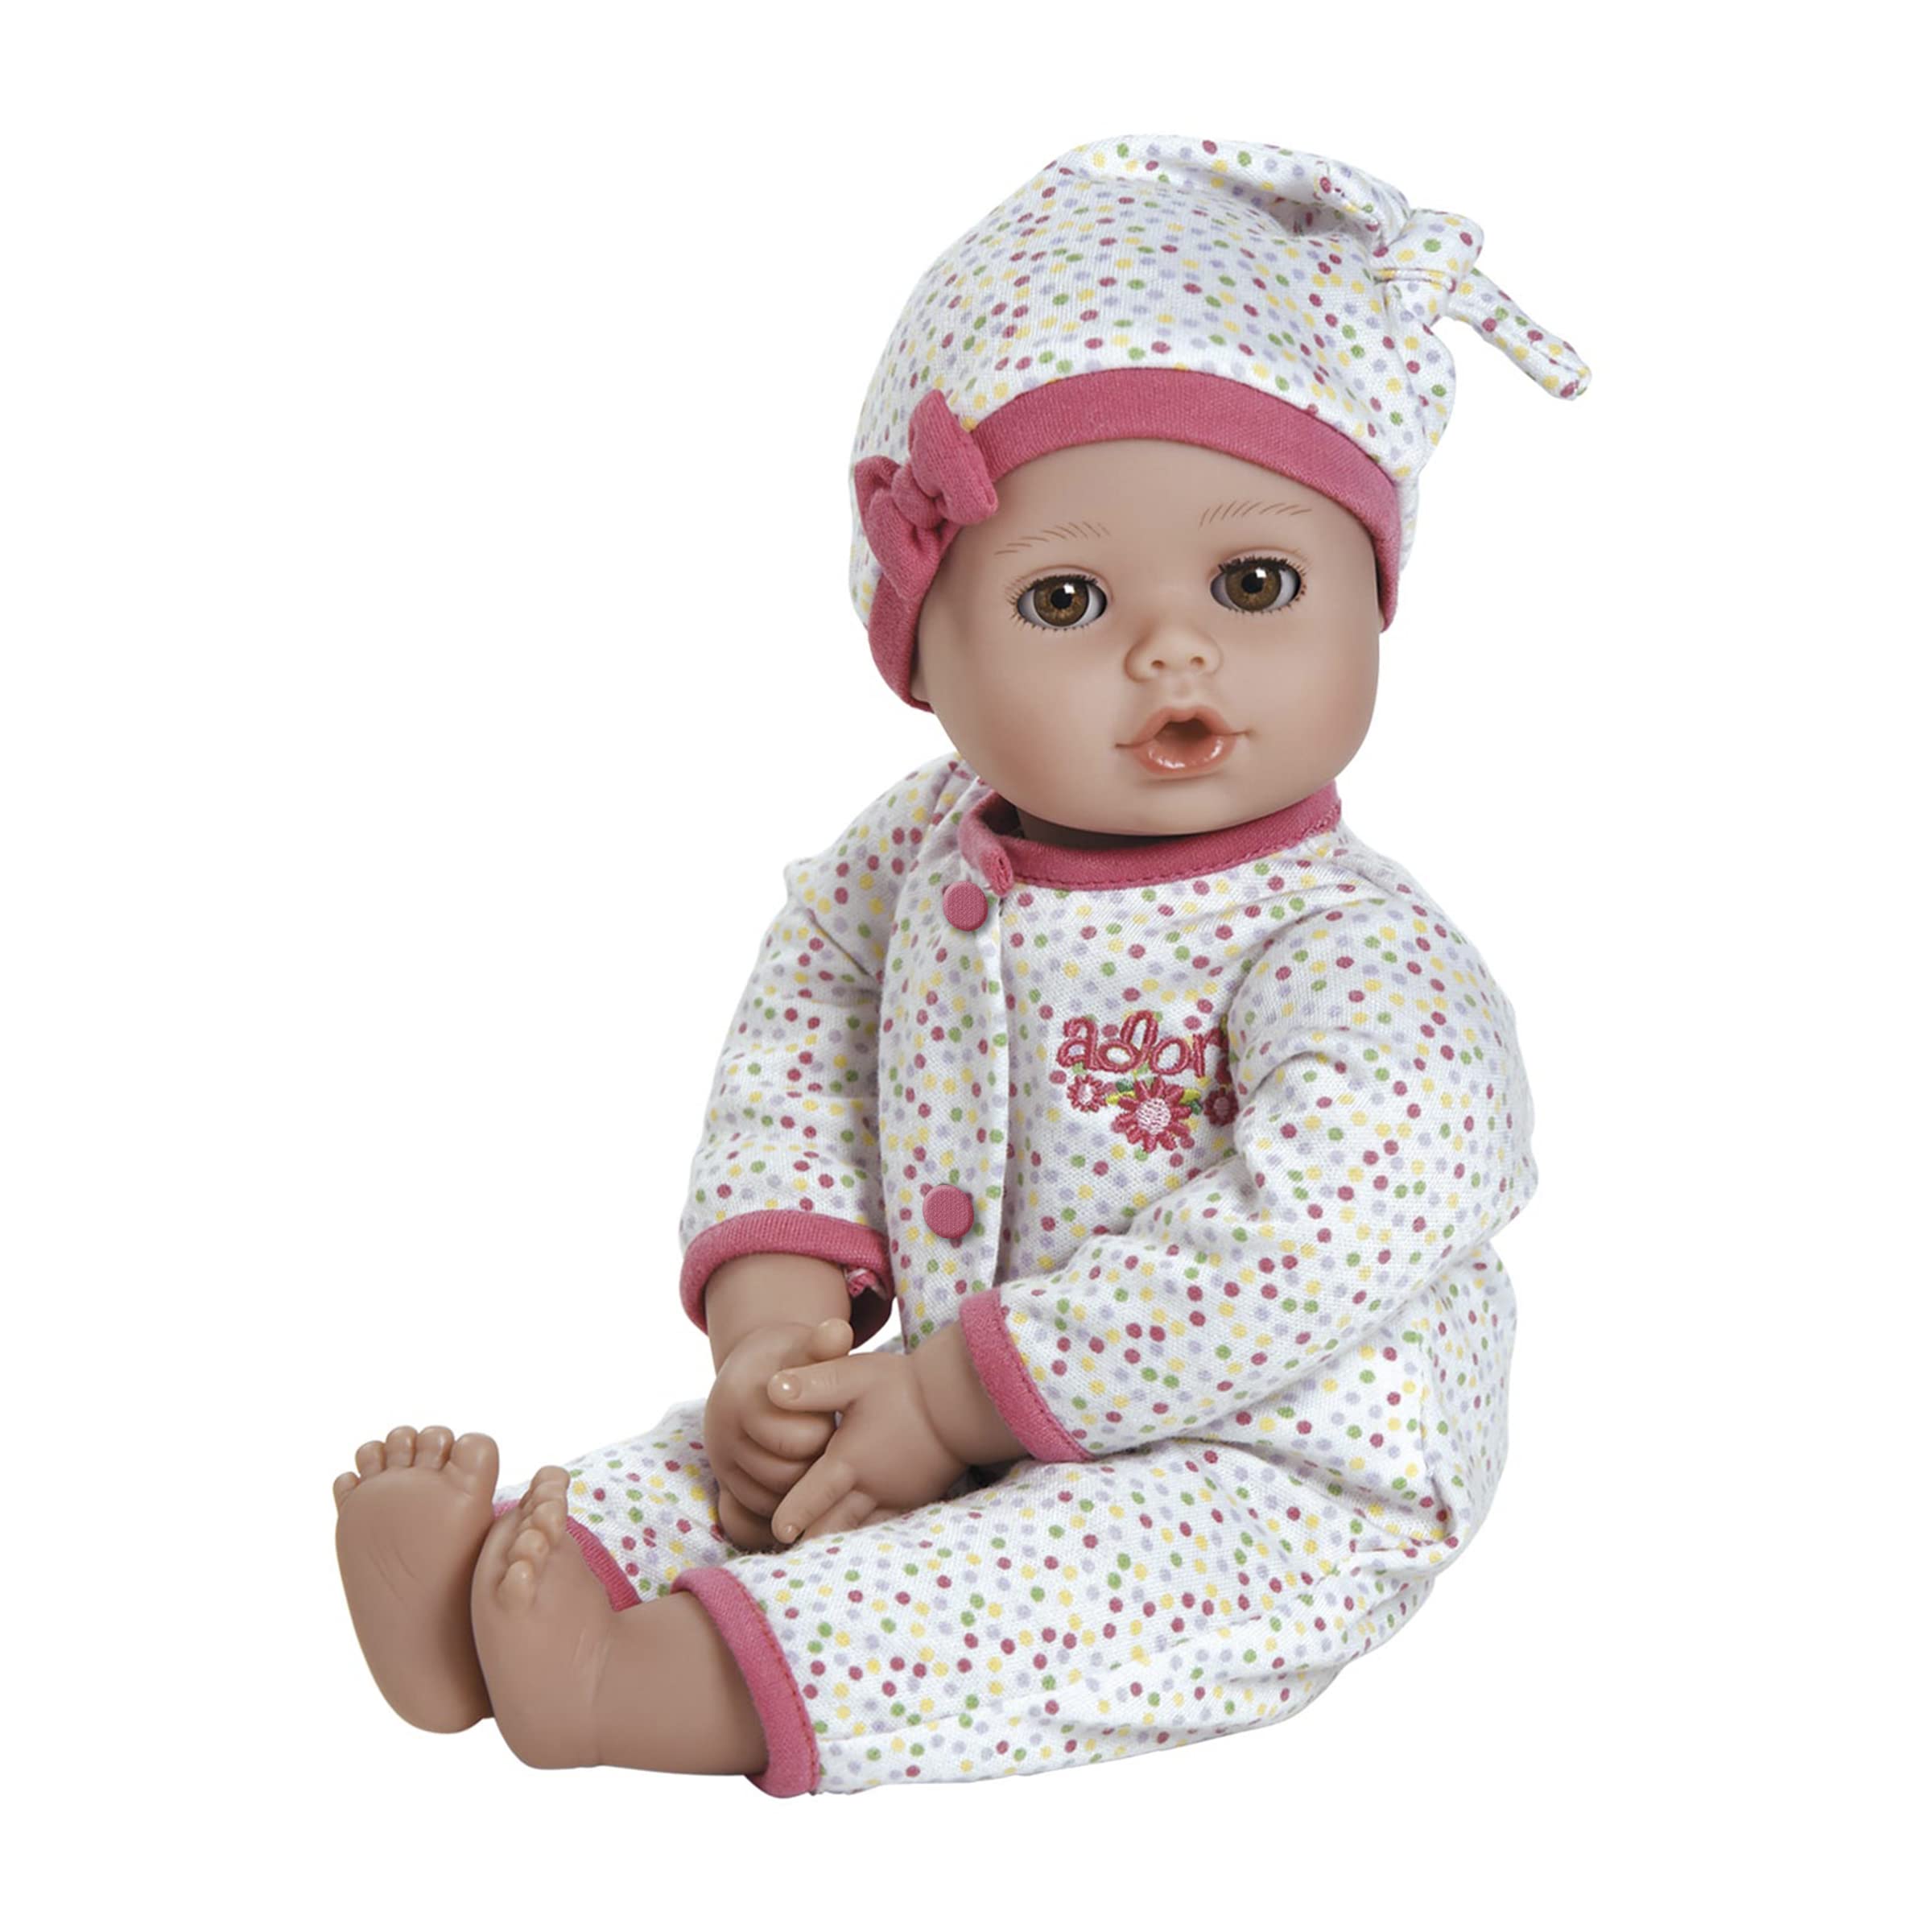 Adora Playtime Dot 13 inch Baby Doll with spotty sleeper, hat and Bottle